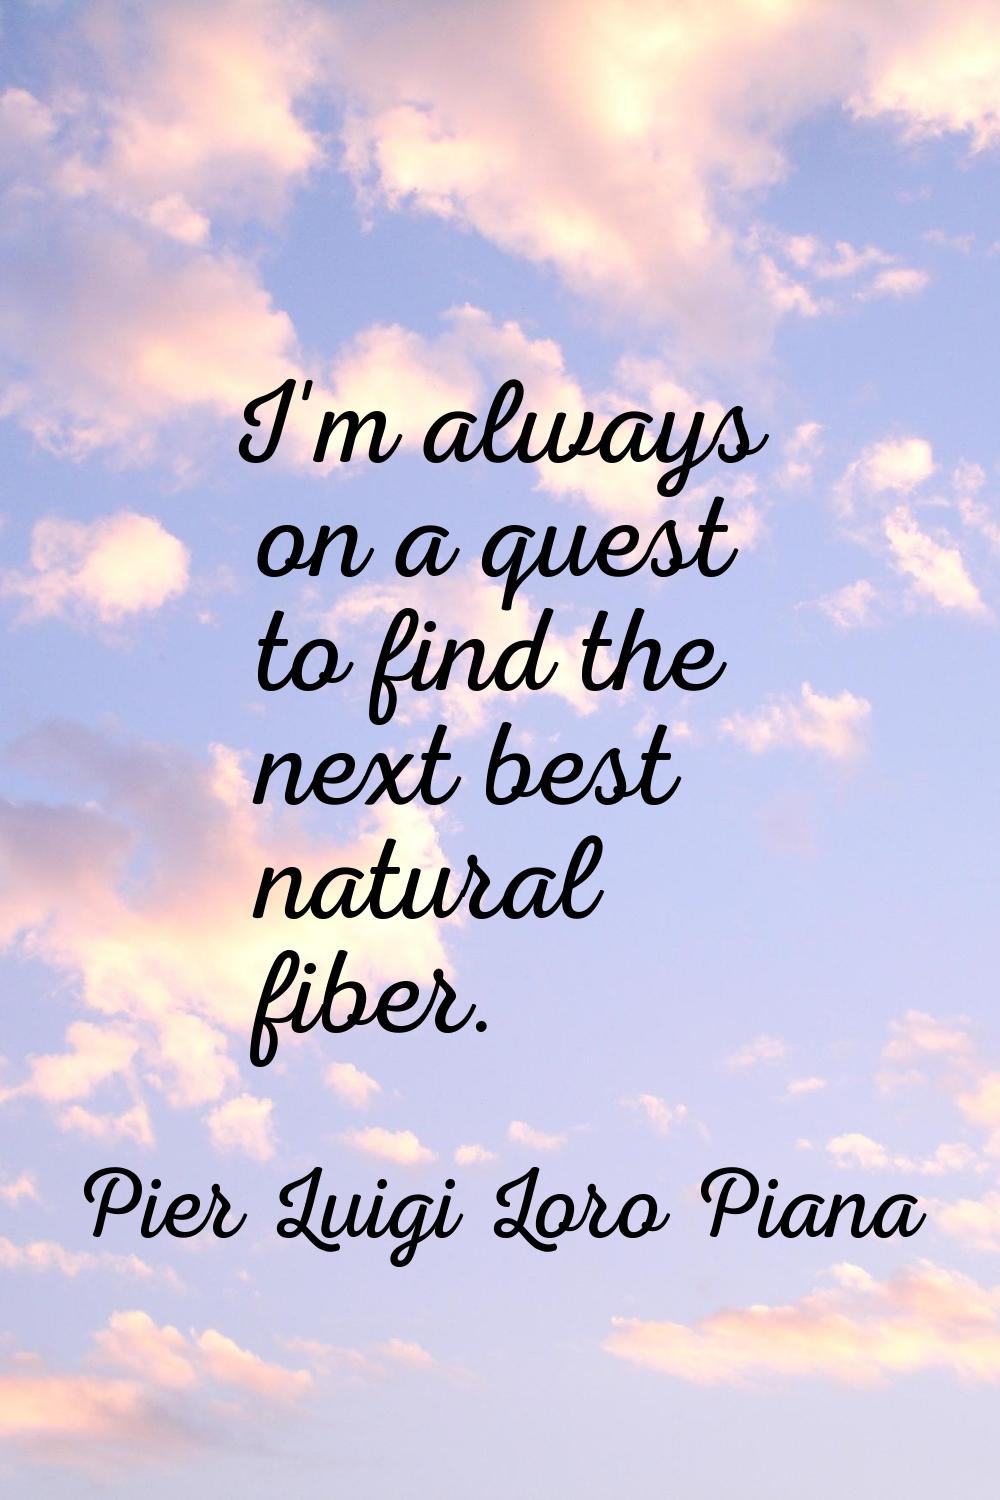 I'm always on a quest to find the next best natural fiber.